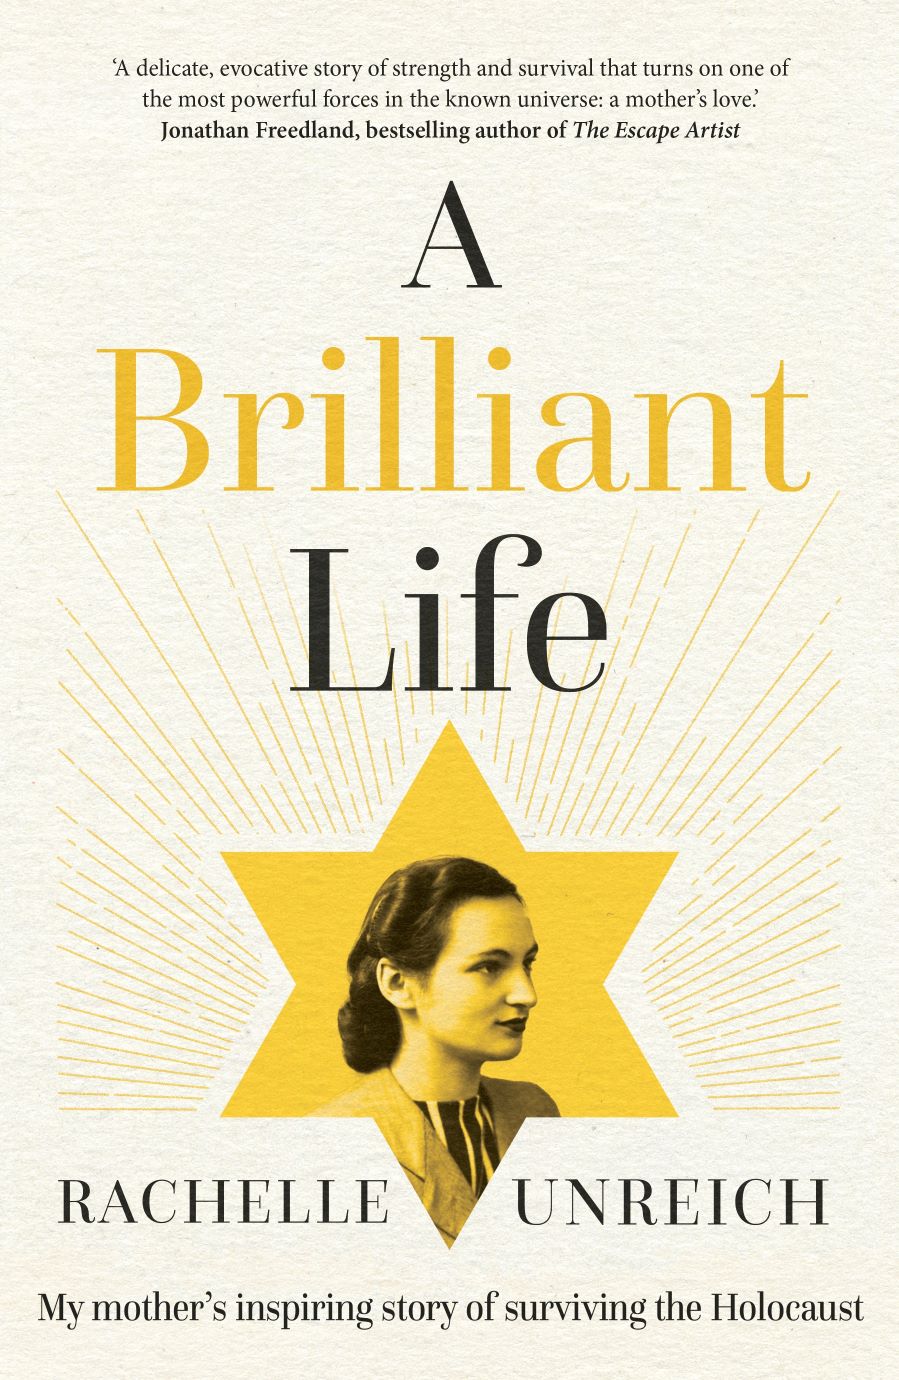 bookcover with a womans profile in a yellow star of David